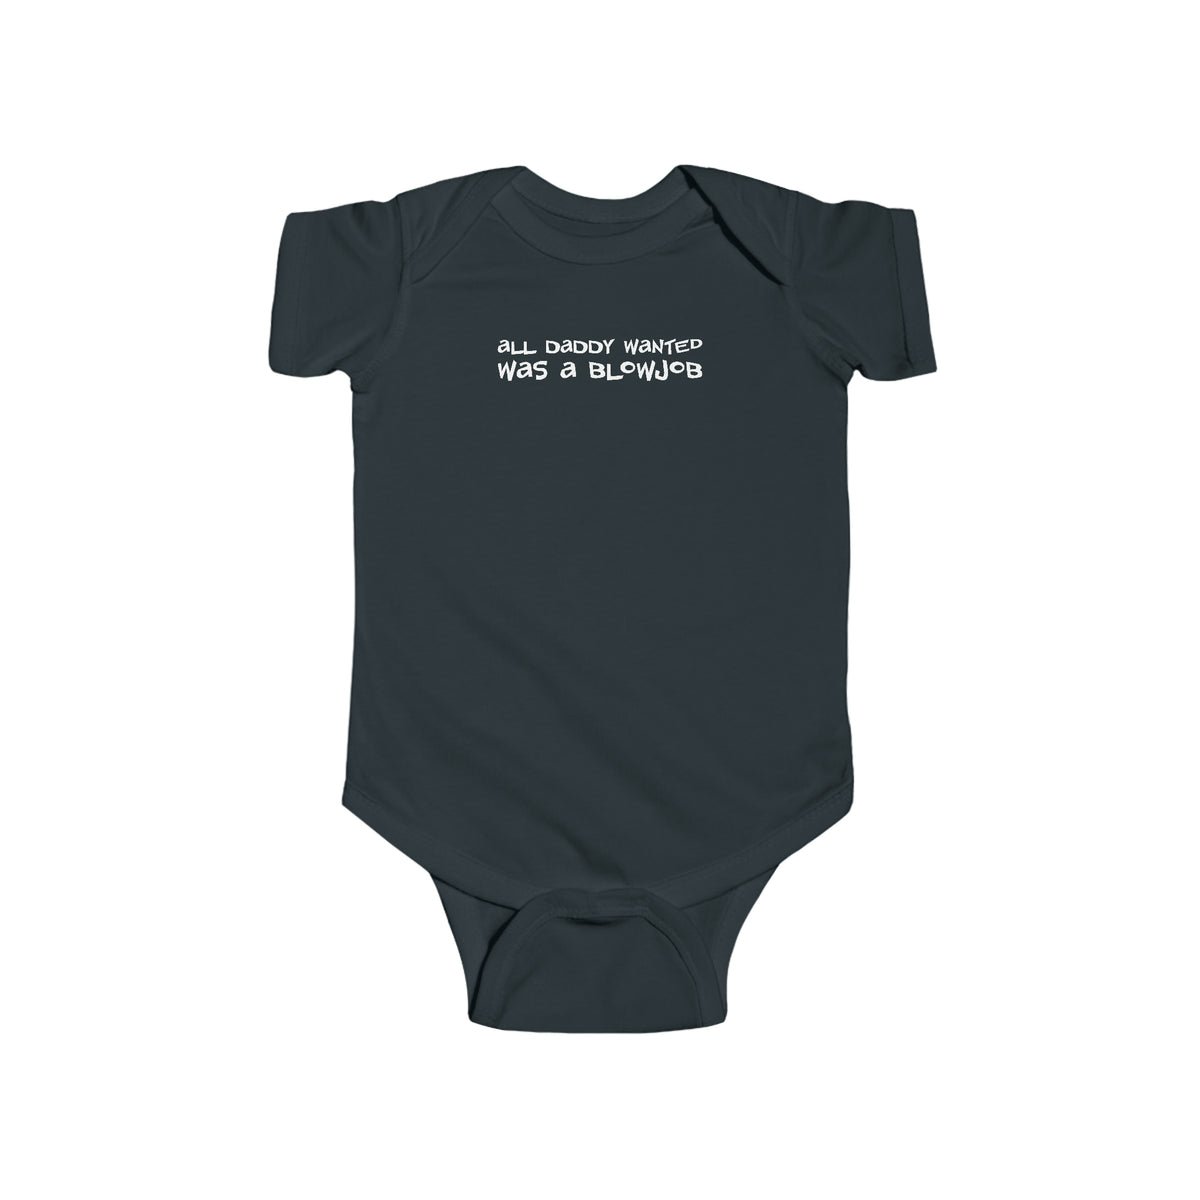 All Daddy Wanted Was A Blowjob - Baby Onesie